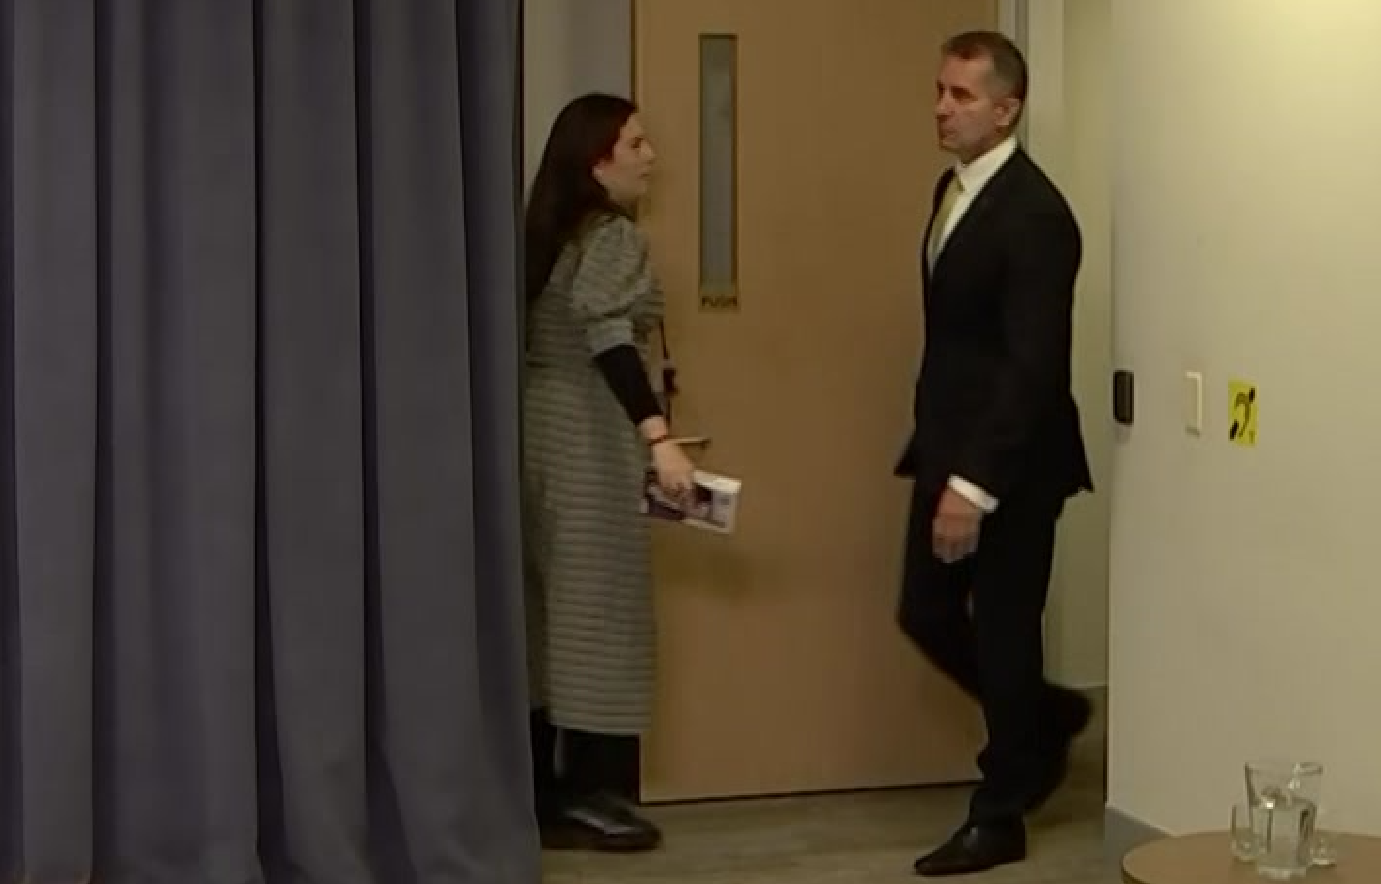 A person stands near a door clutching a box of tissues